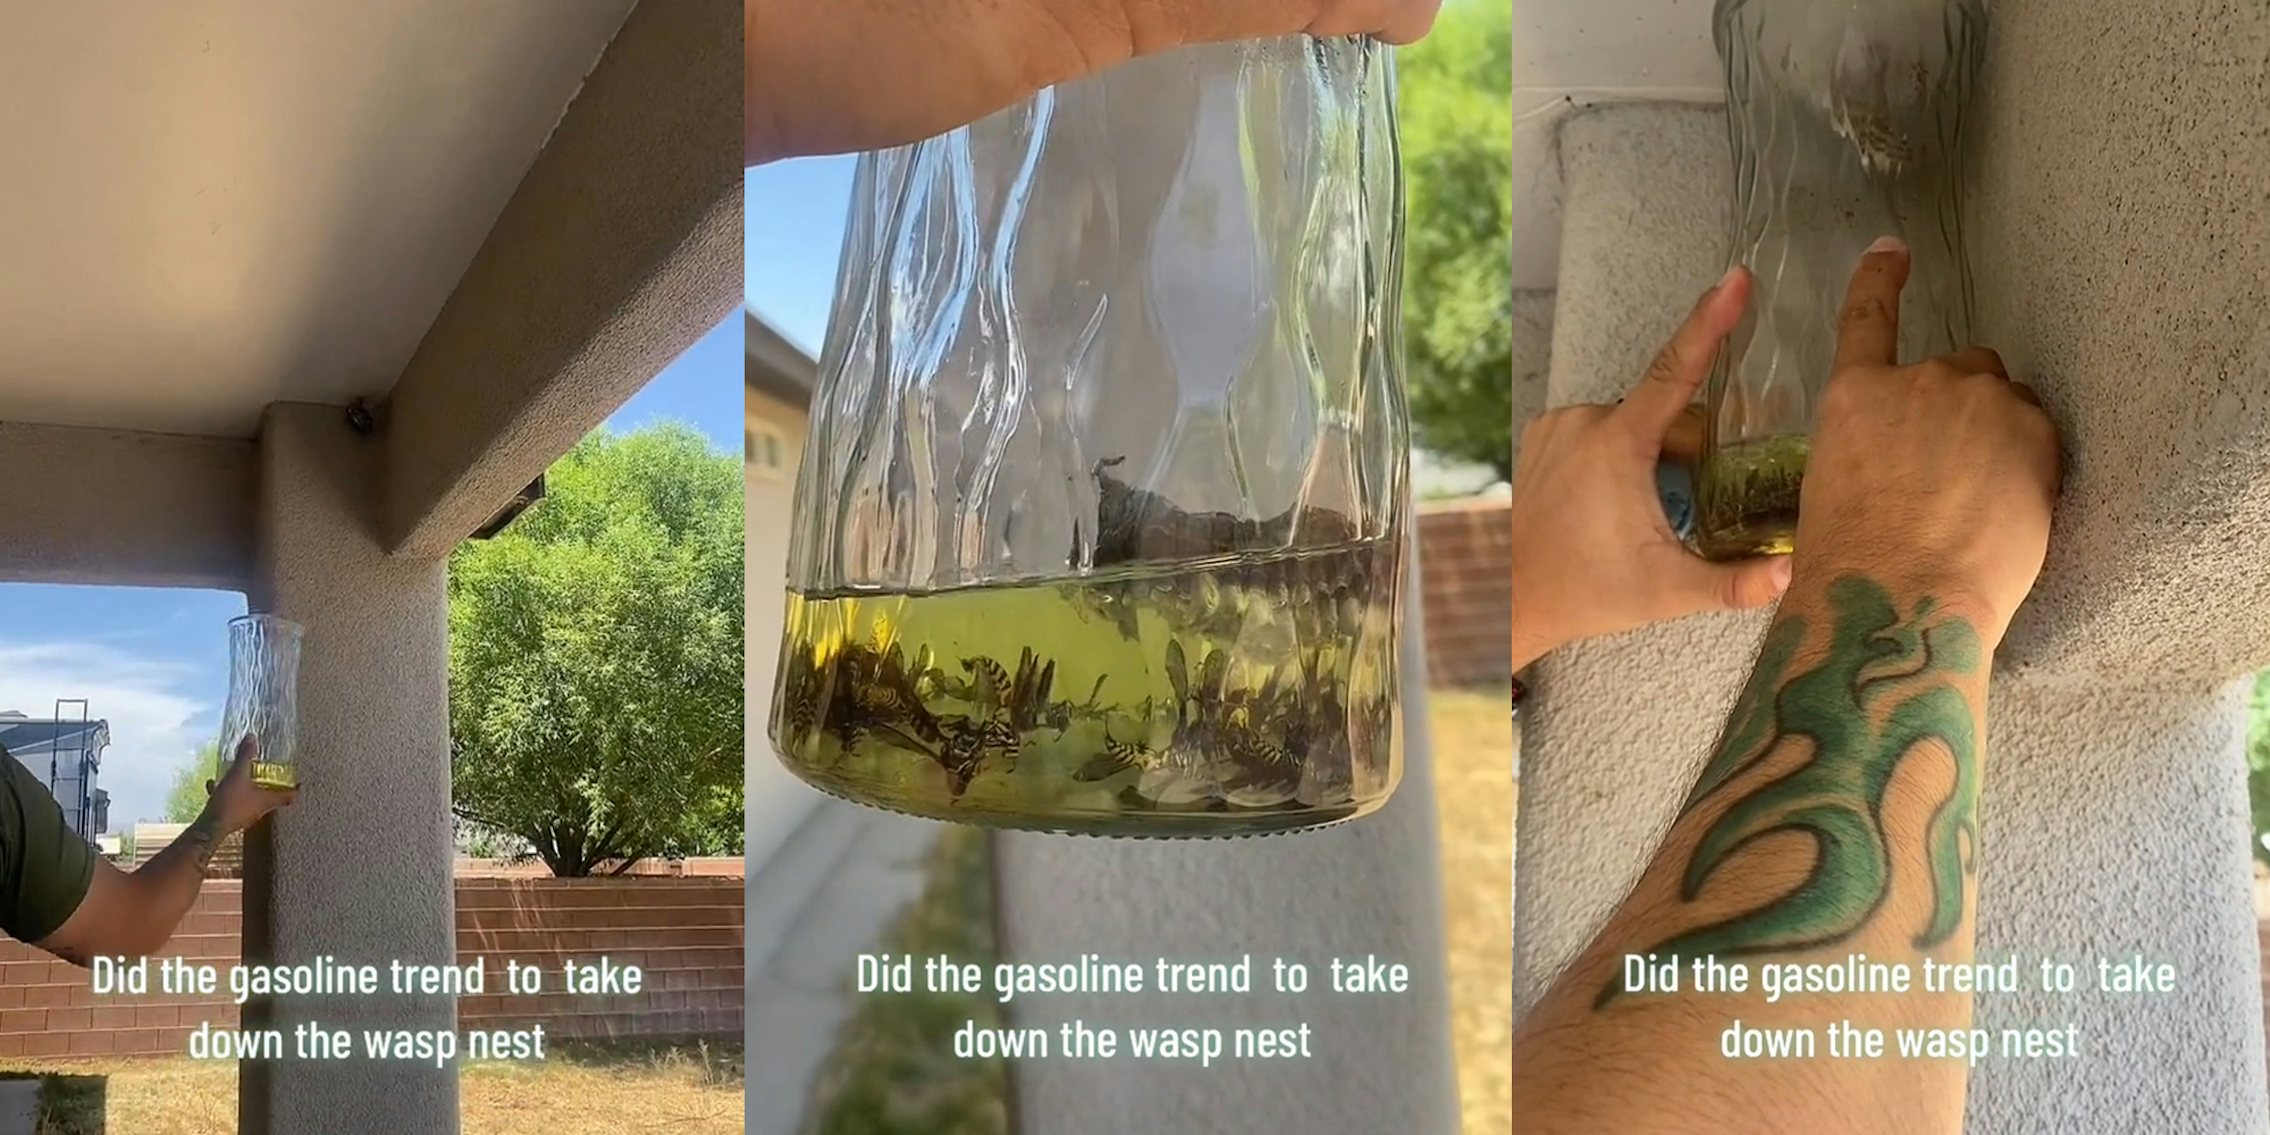 Woman uses gasoline hack to disperse wasp nest